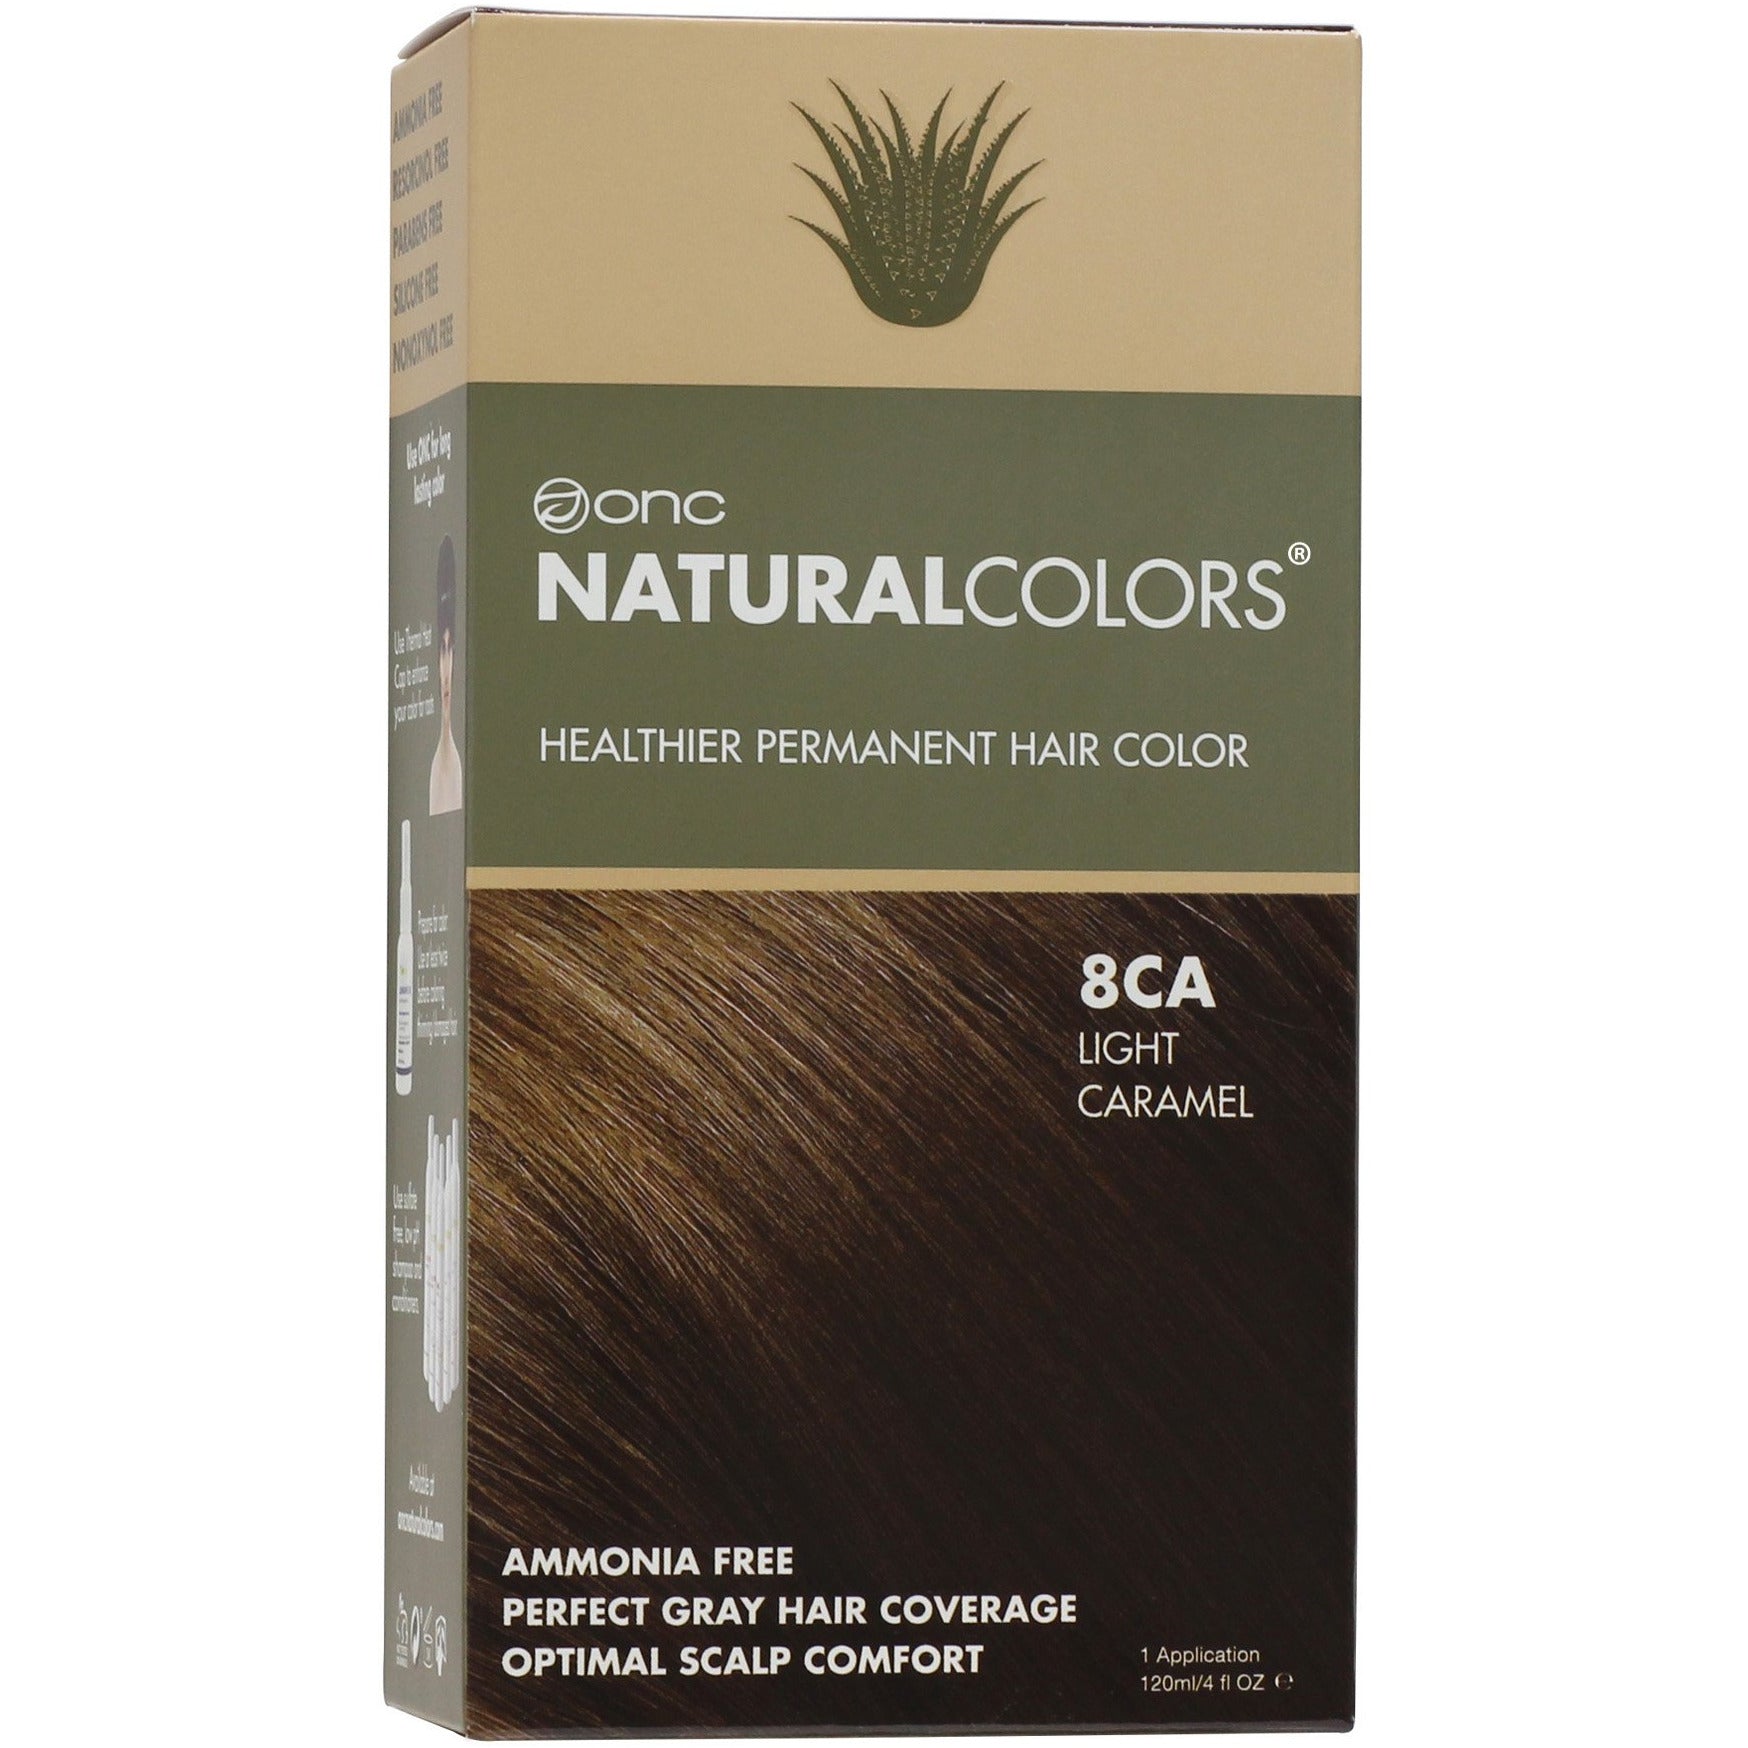 8CA Light Caramel Heat Activated Hair Dye With Organic Ingredients - 120 ml (4 fl. oz)